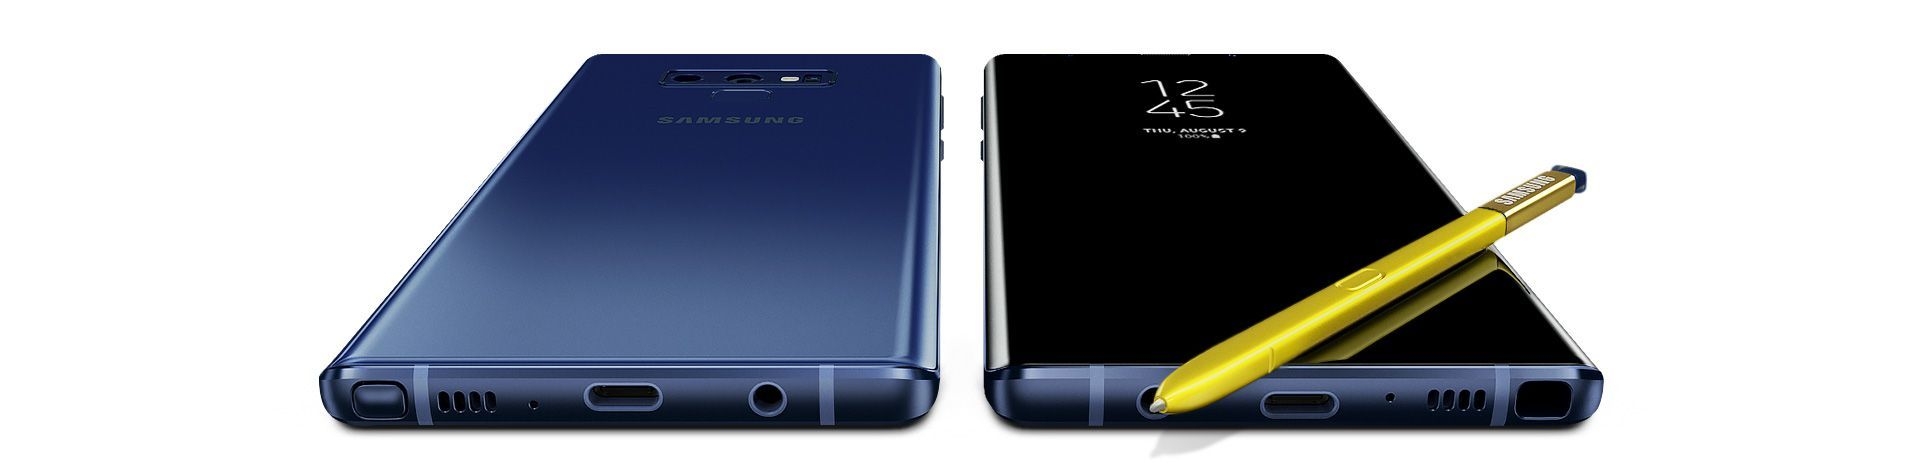 Two Galaxy Note9s, one seen from the rear and the other seen from the front, with the S Pen laying on the screen